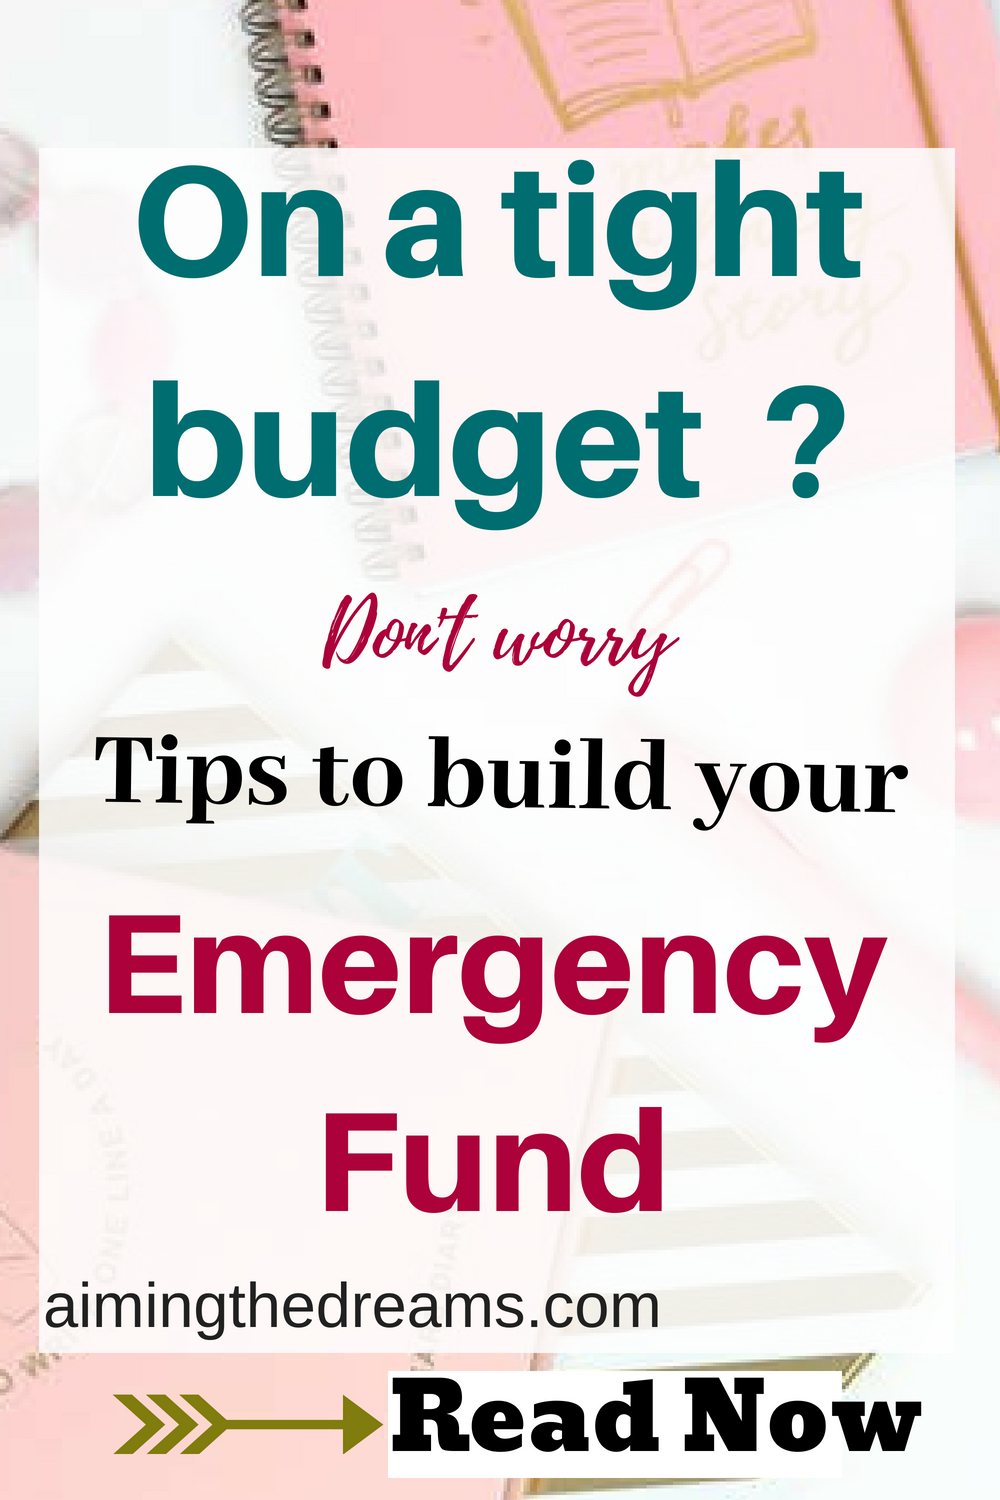 You can build your emergency fund even if you are on a tight budget. Try to squeeze money from all your chores and start earning from side hustles.